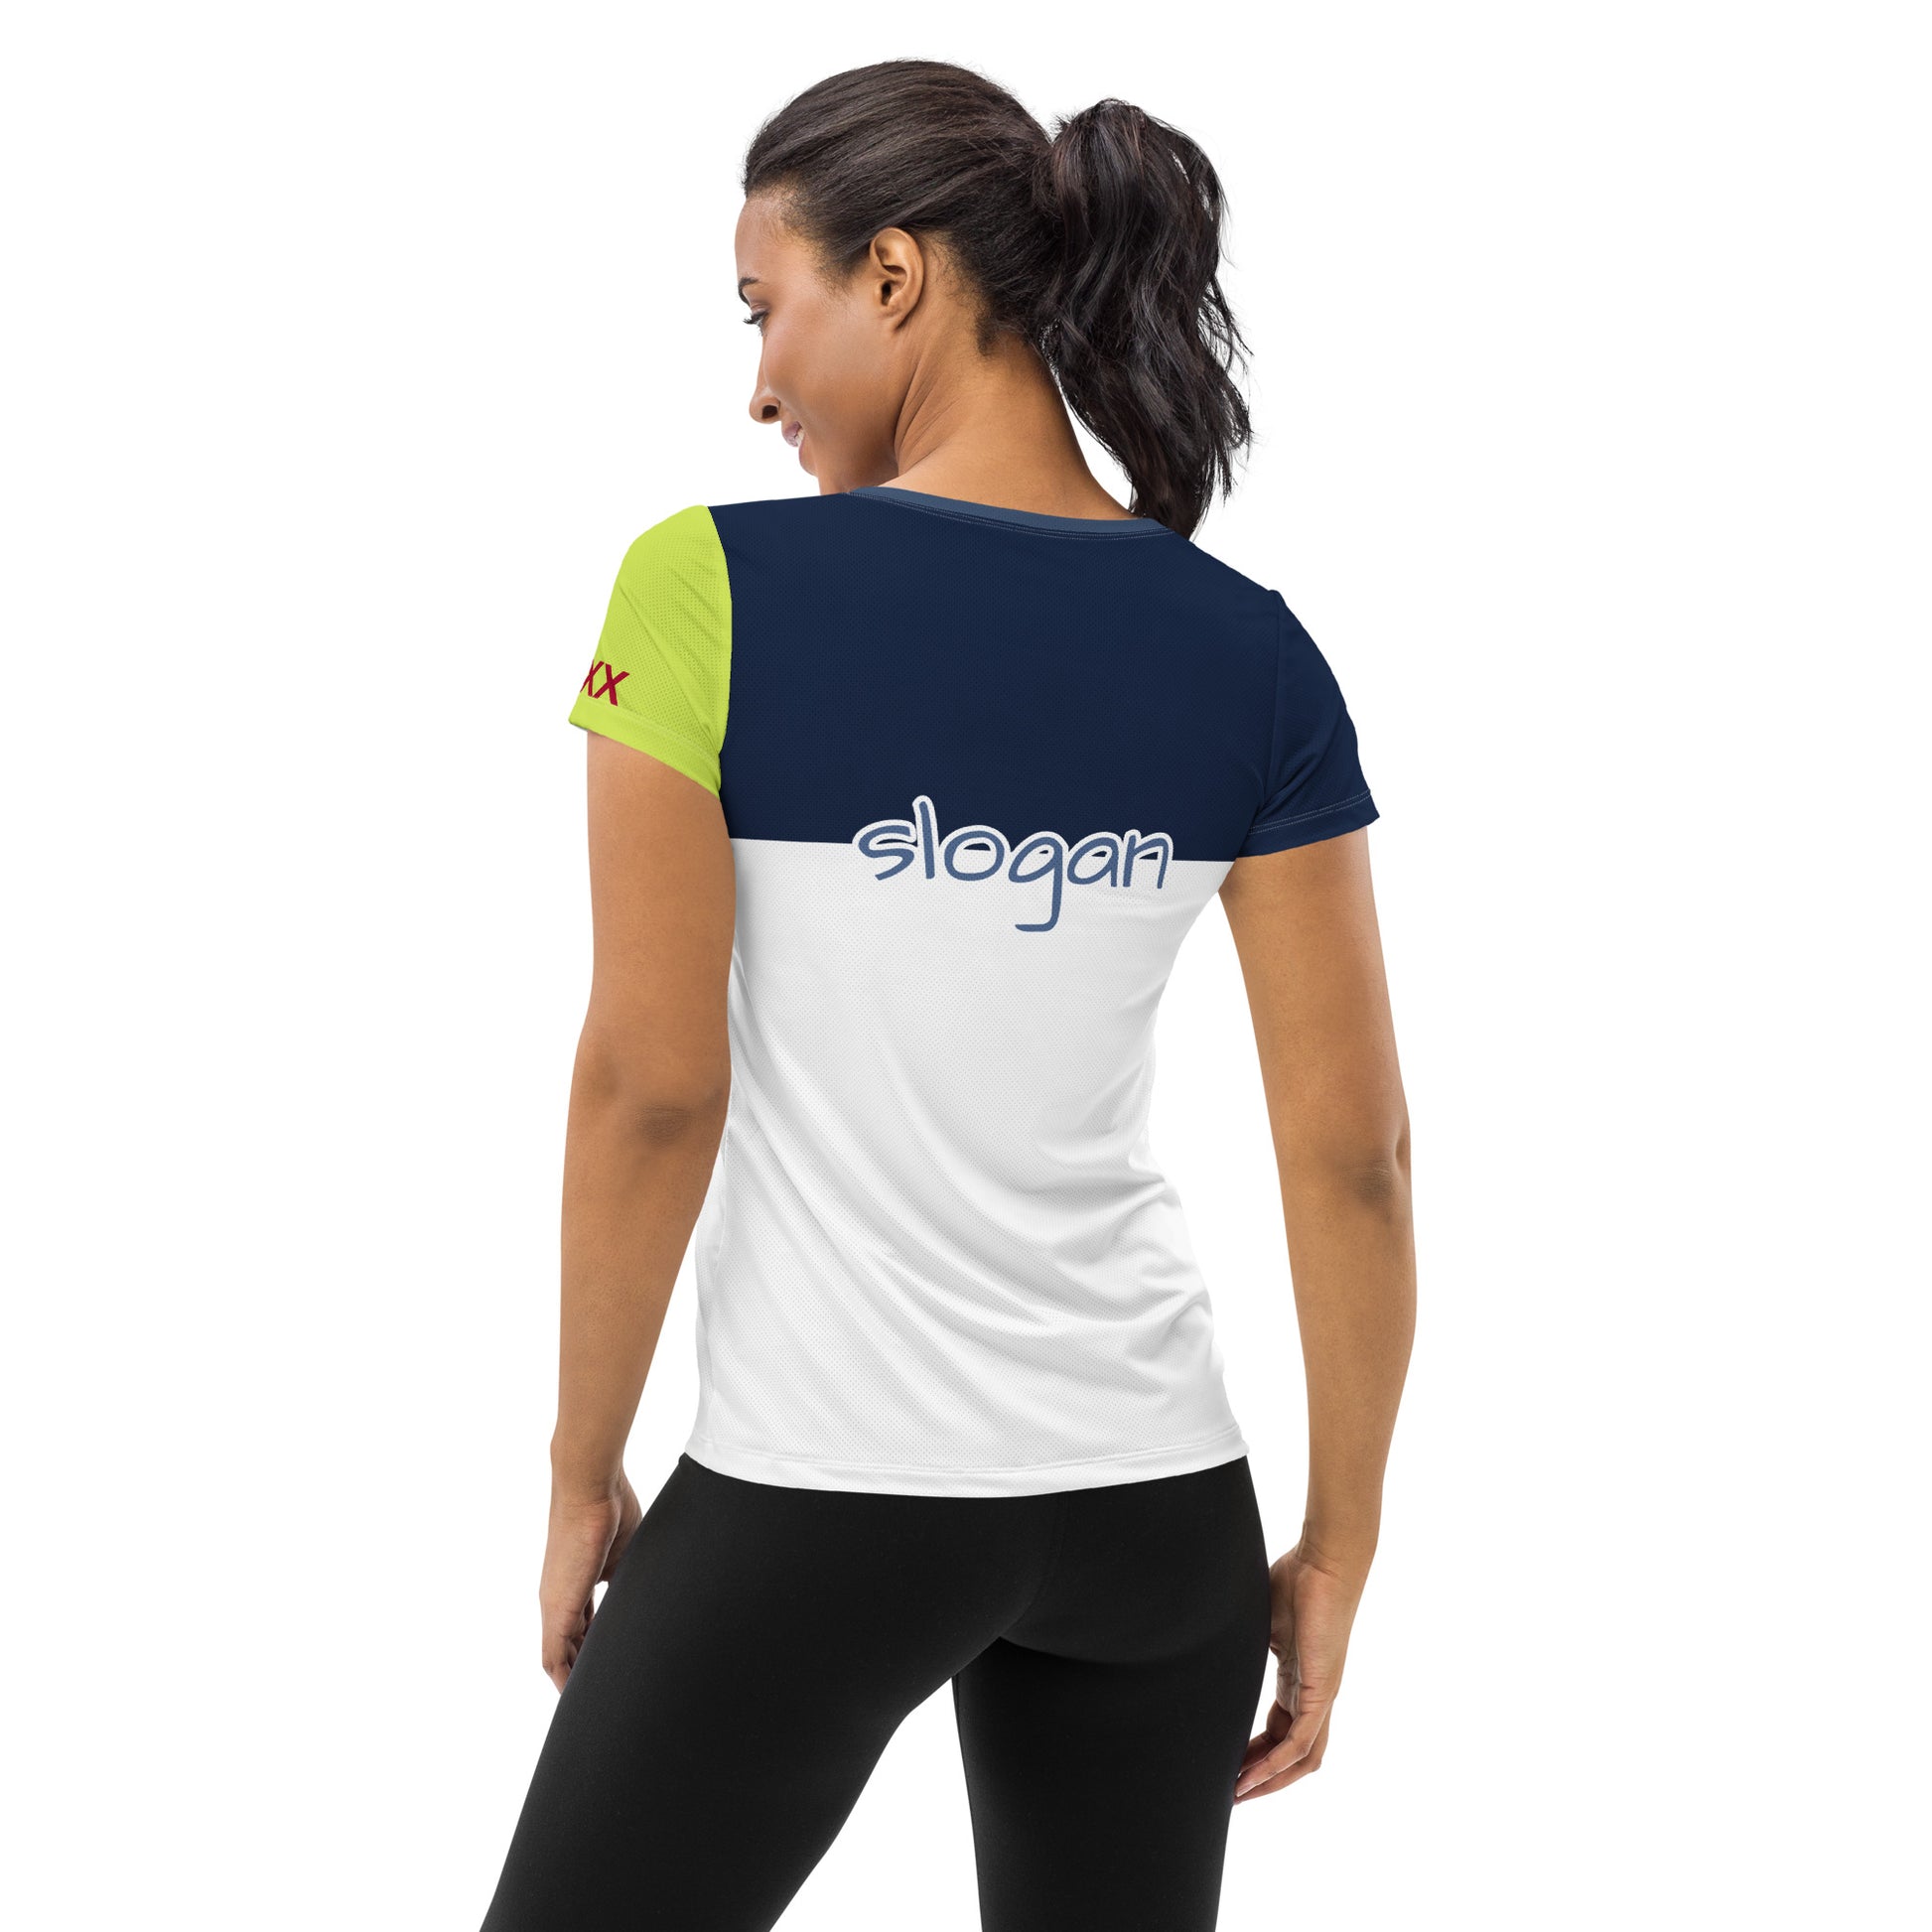 TIME OF VIBES - Women's Athletic T-shirt CORPORATE - €49.00